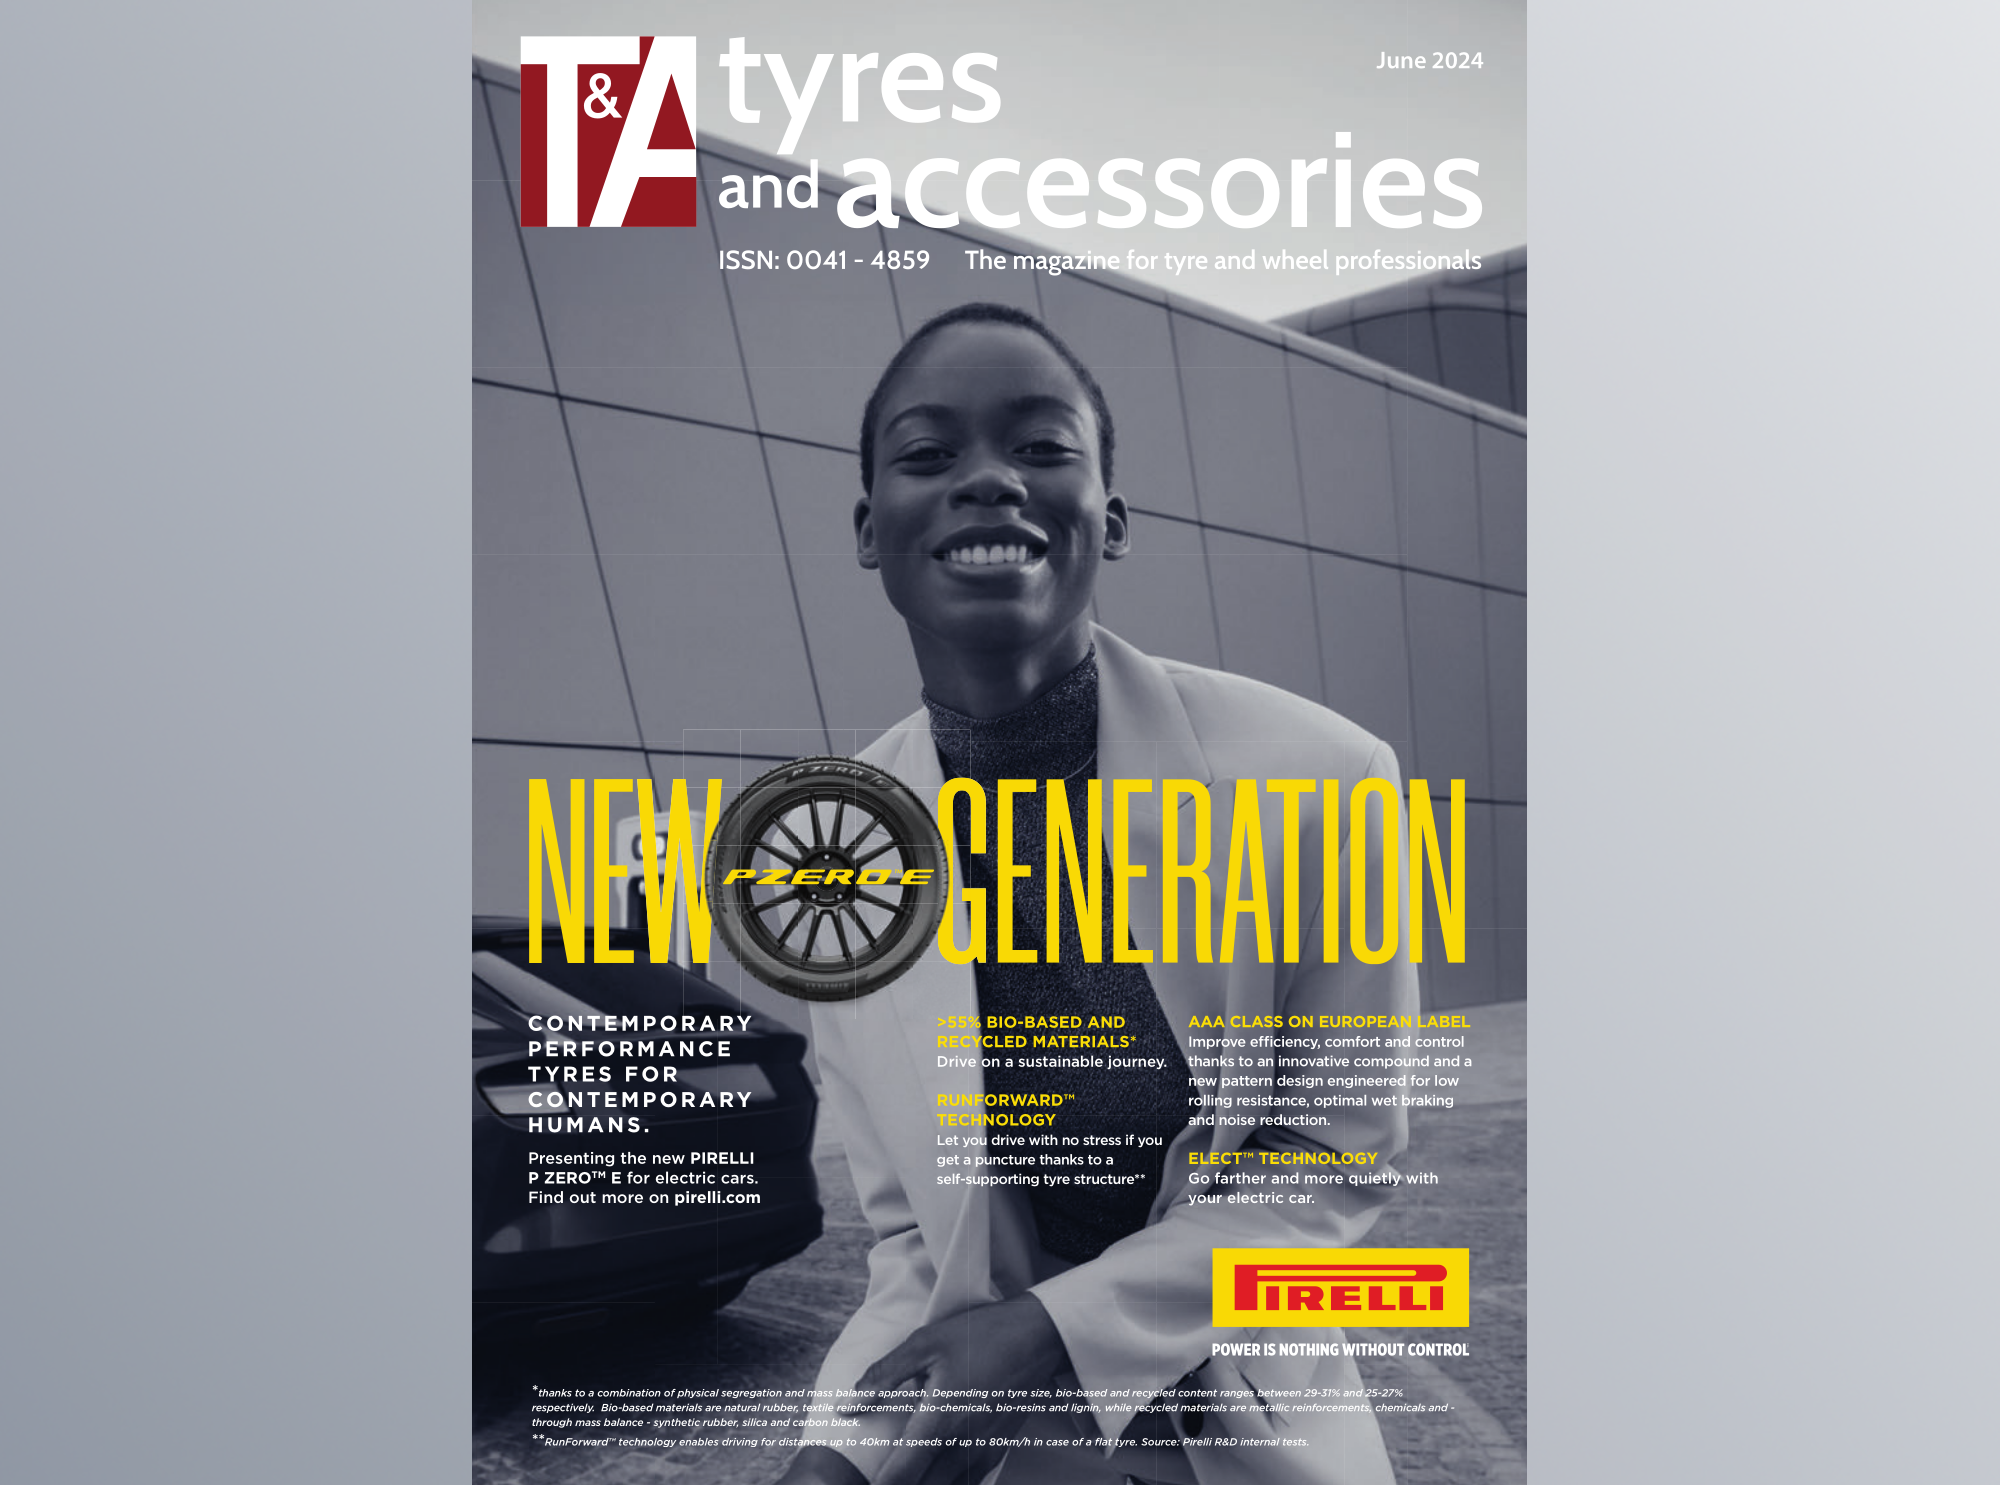 Read and download Tyres & Accessories Magazine June 2024 now